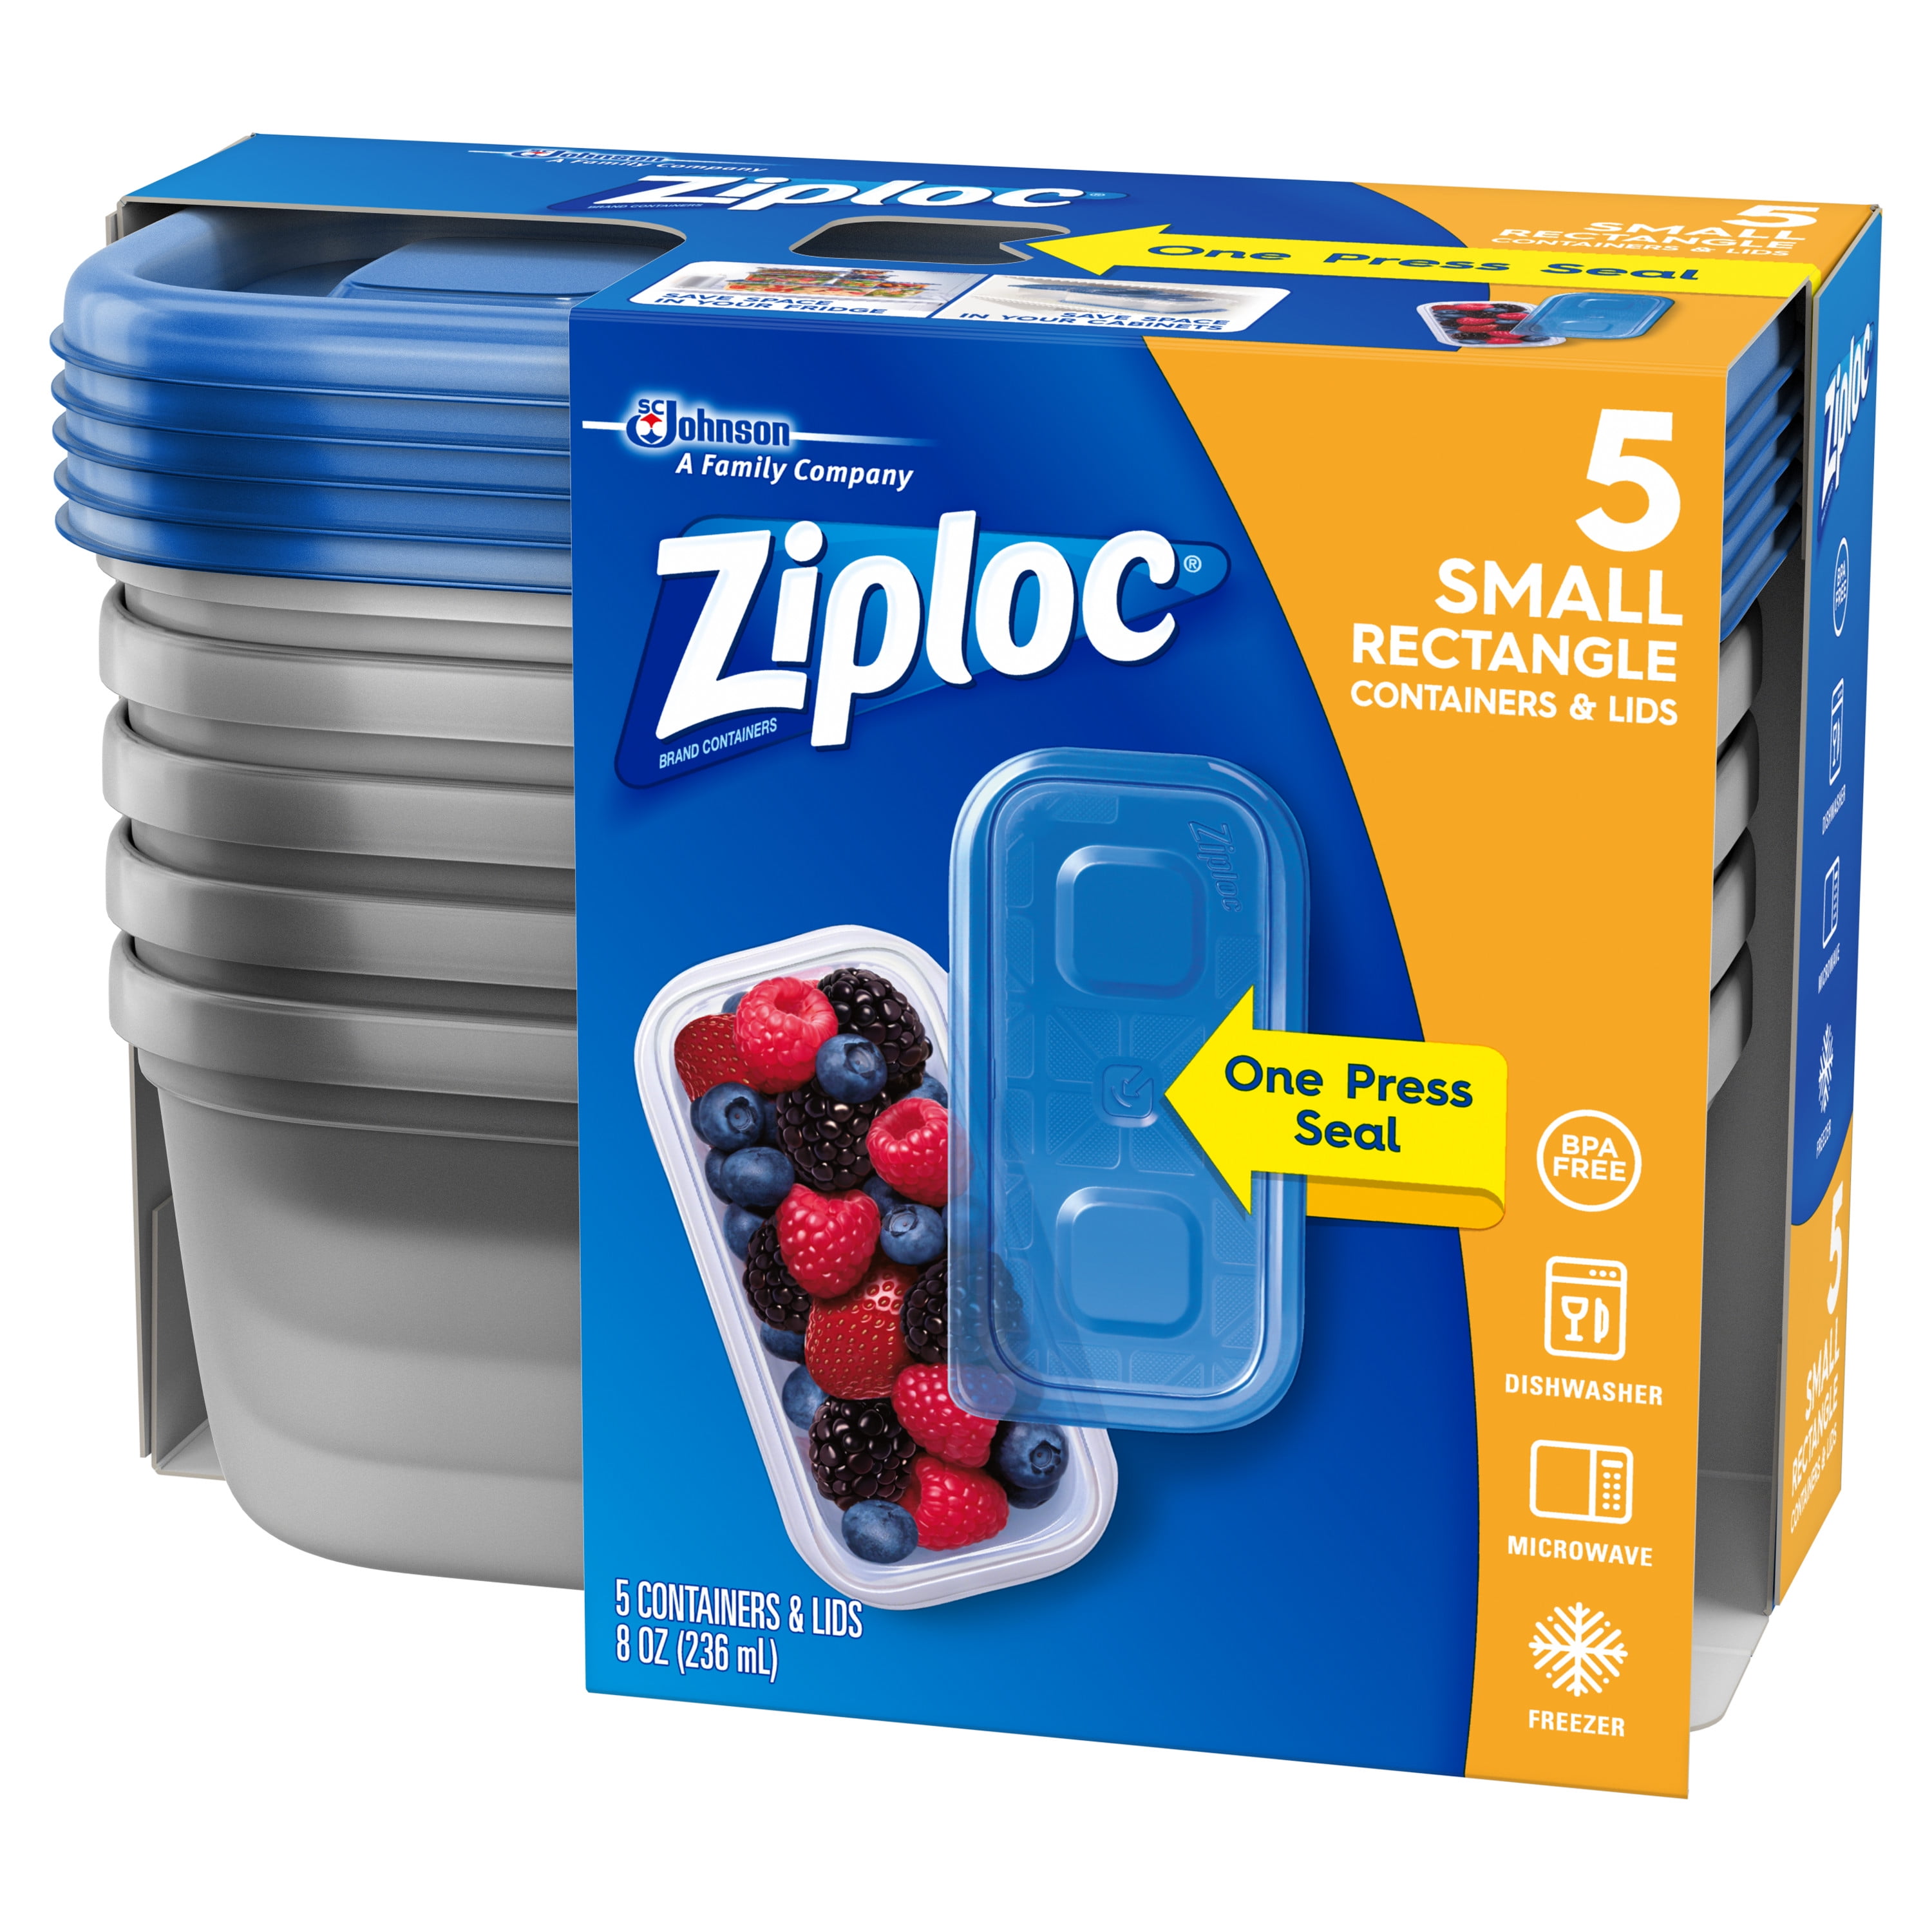 2-PACK Ziploc 8oz Food Storage Rectangular Clear Containers 5-count 10 total 